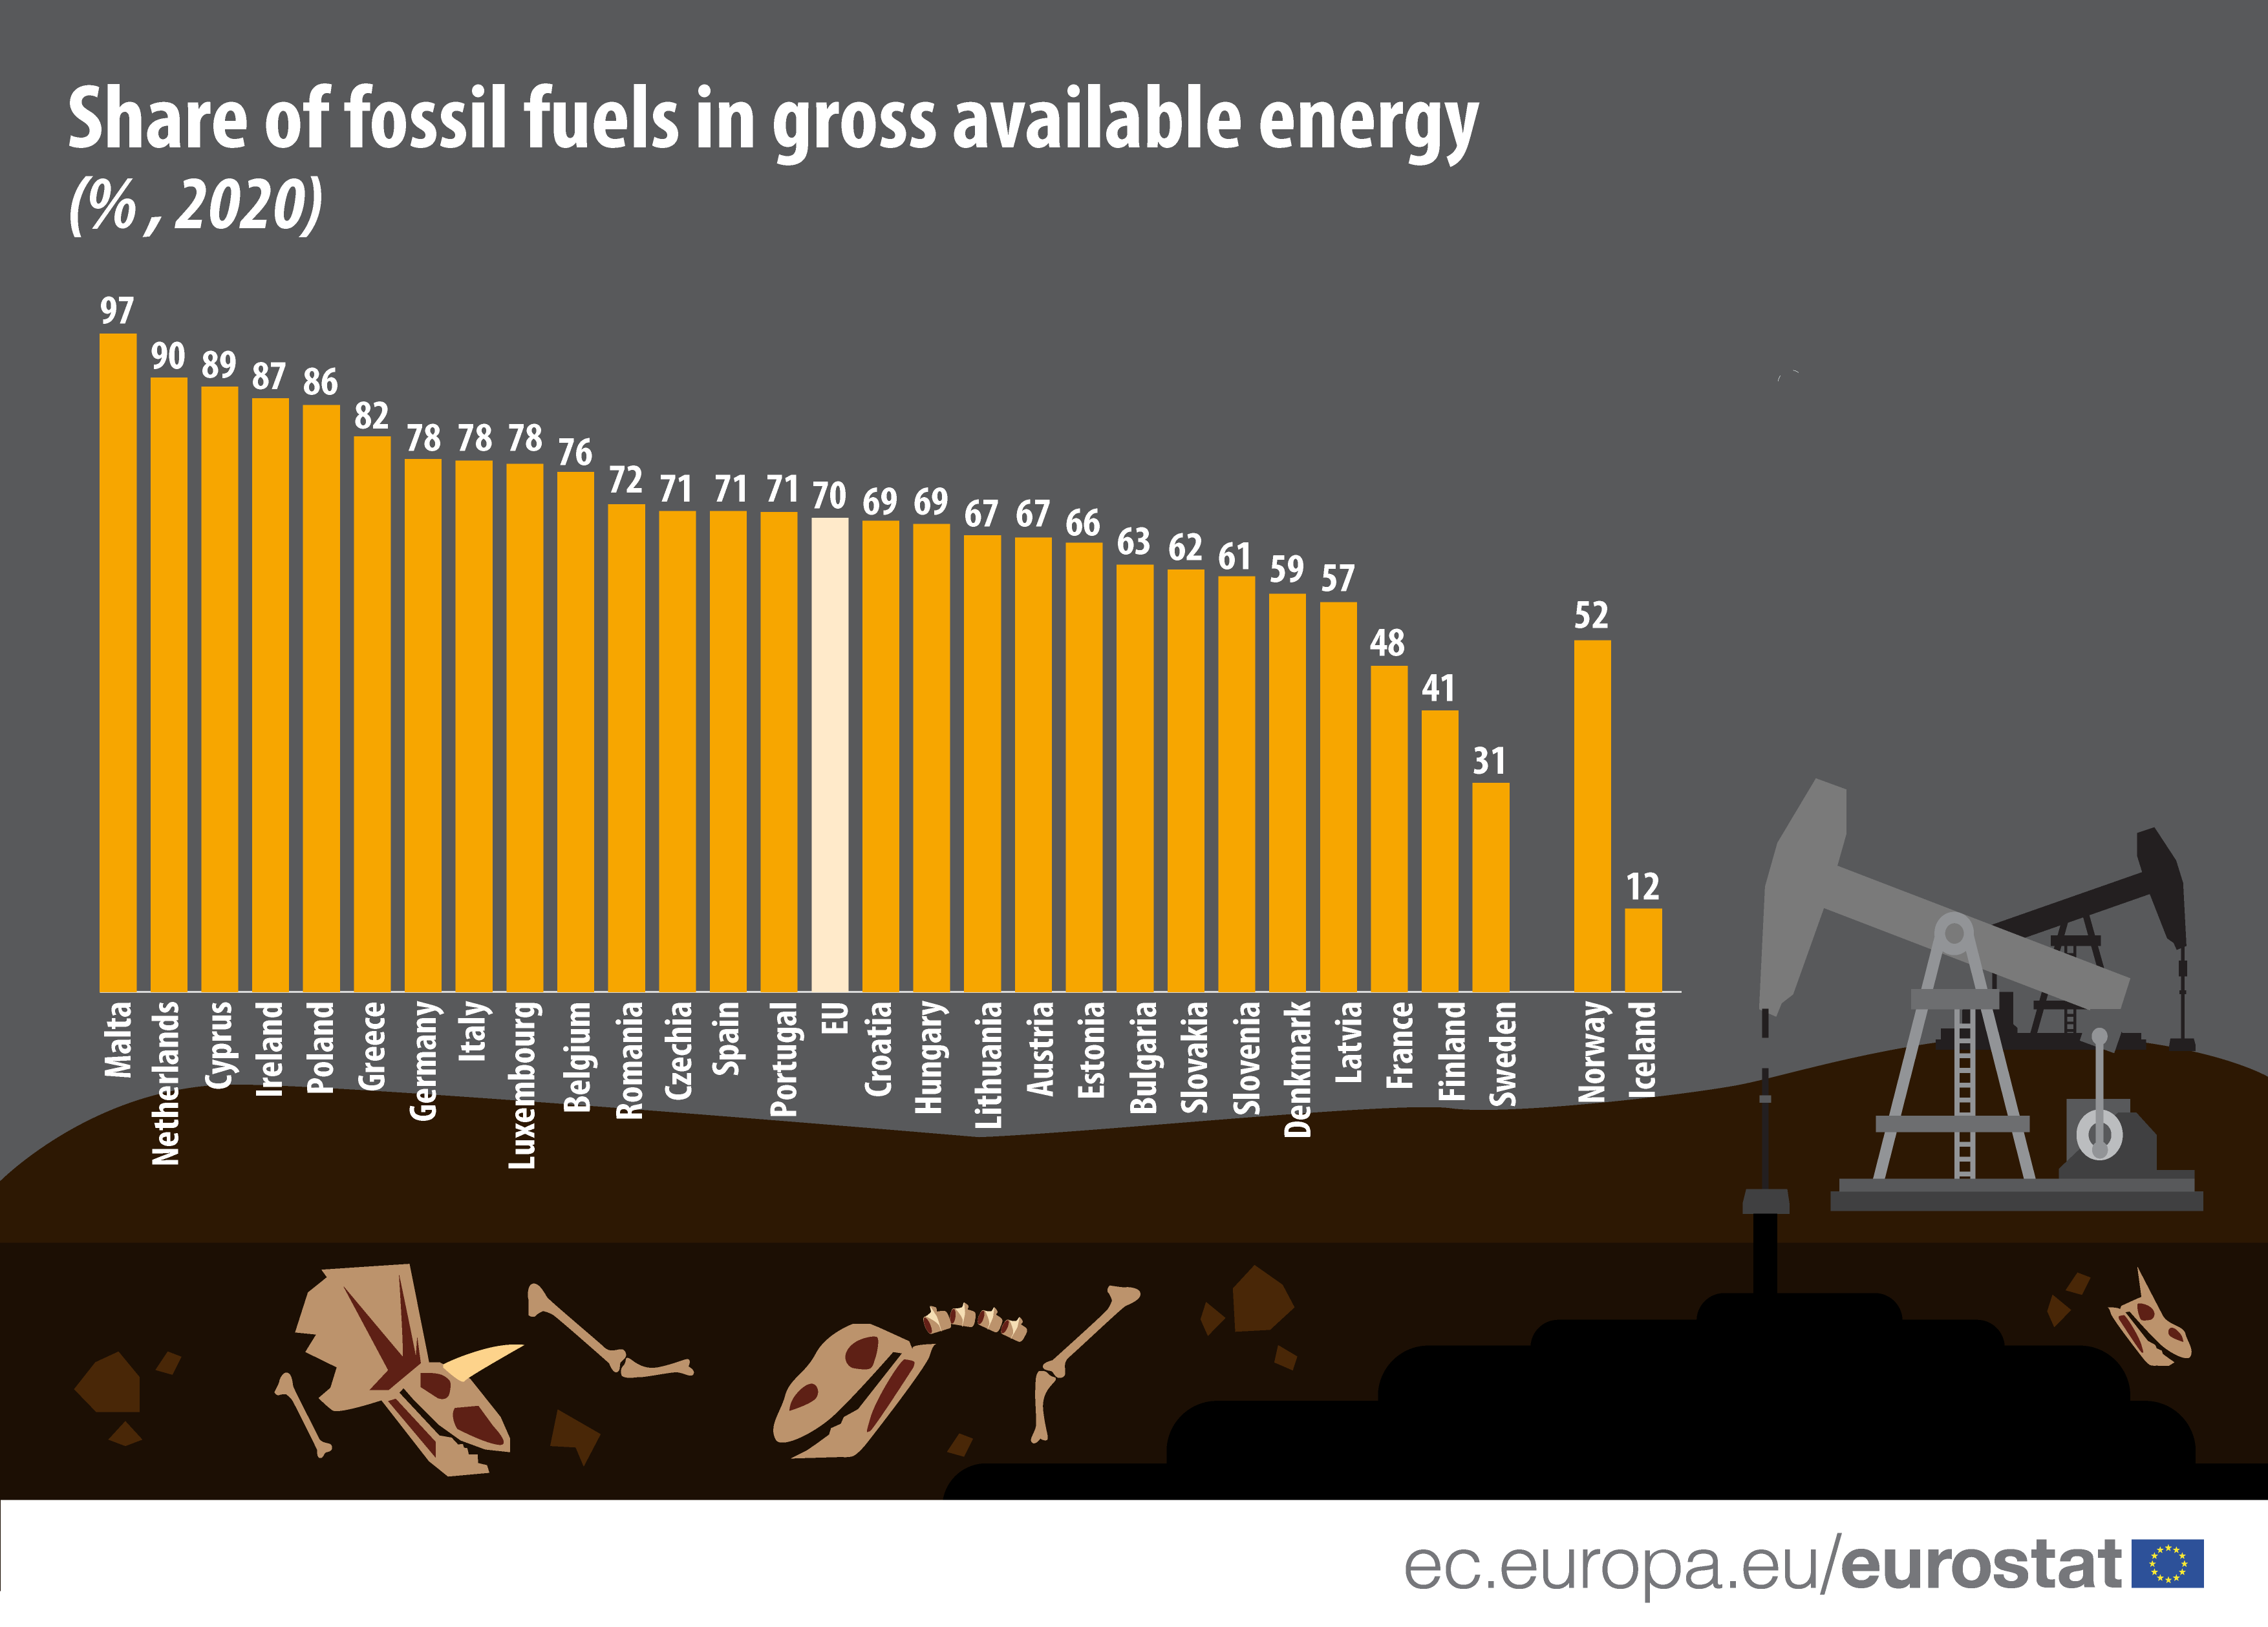 Bar graph: Share of fossil fuels in gross available energy as % in 2020, in the EU and EFTA countries